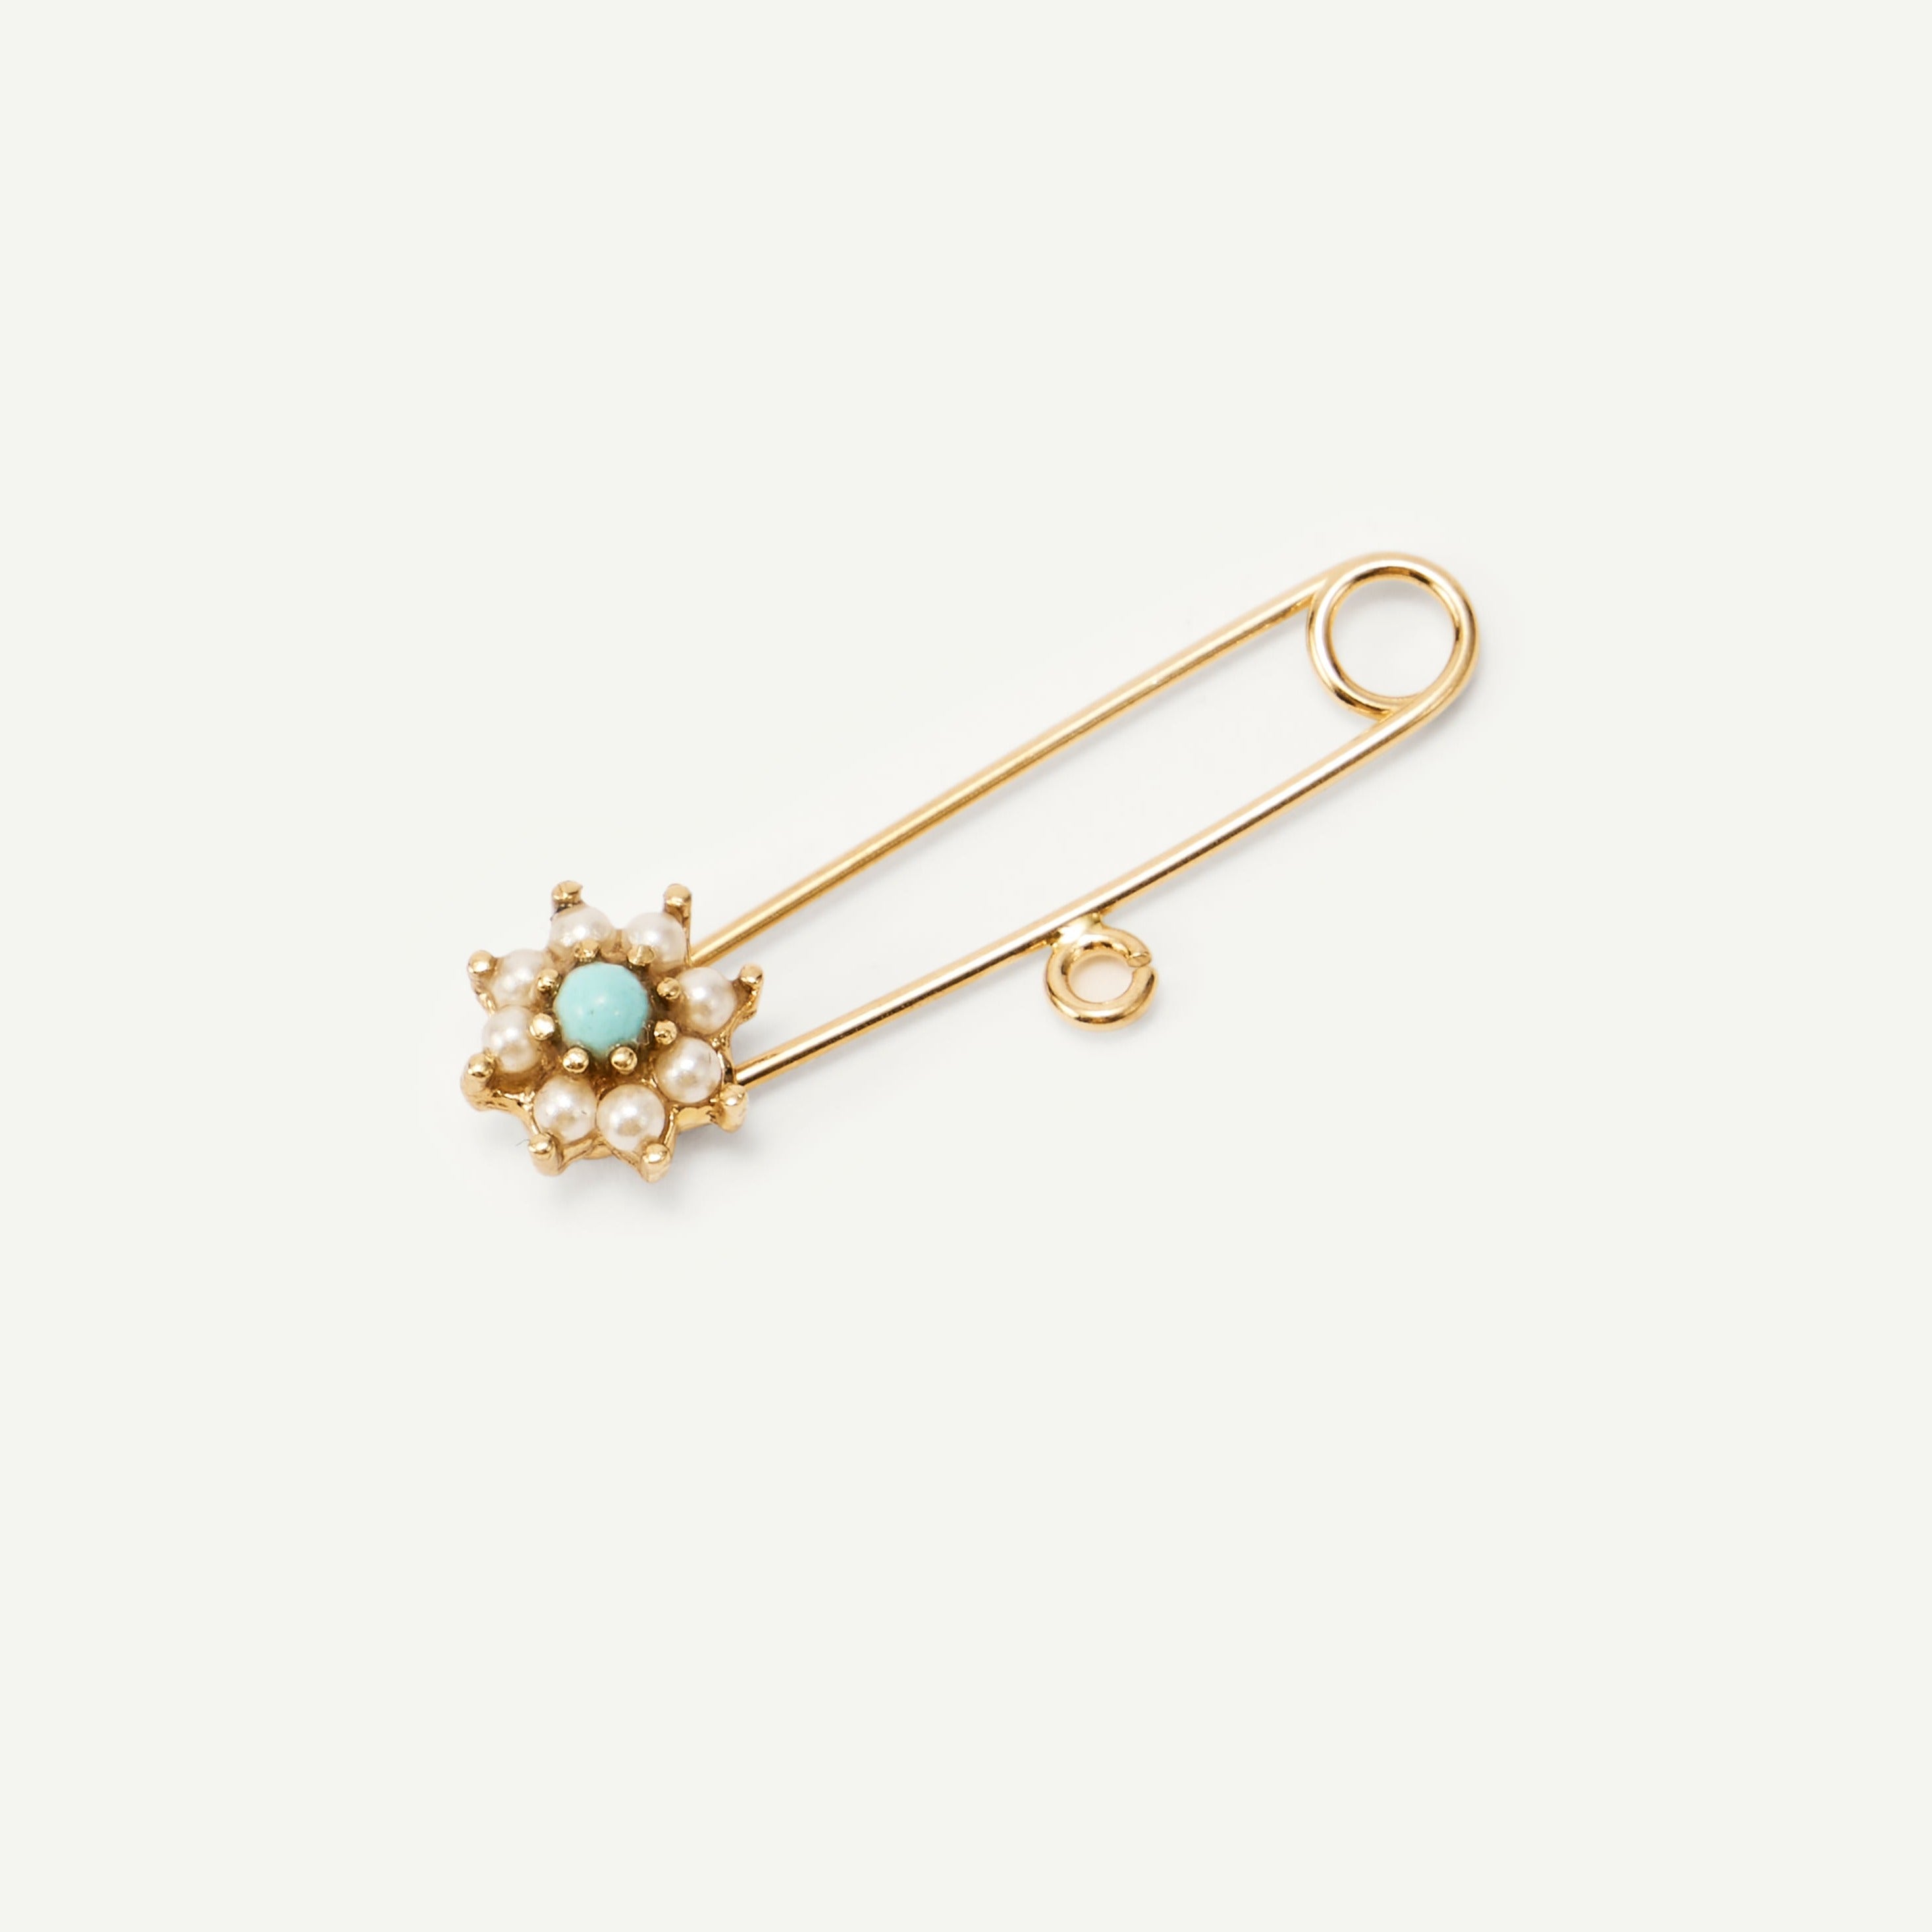 'NOLA' Pearl & Turquoise Flower BABY PIN